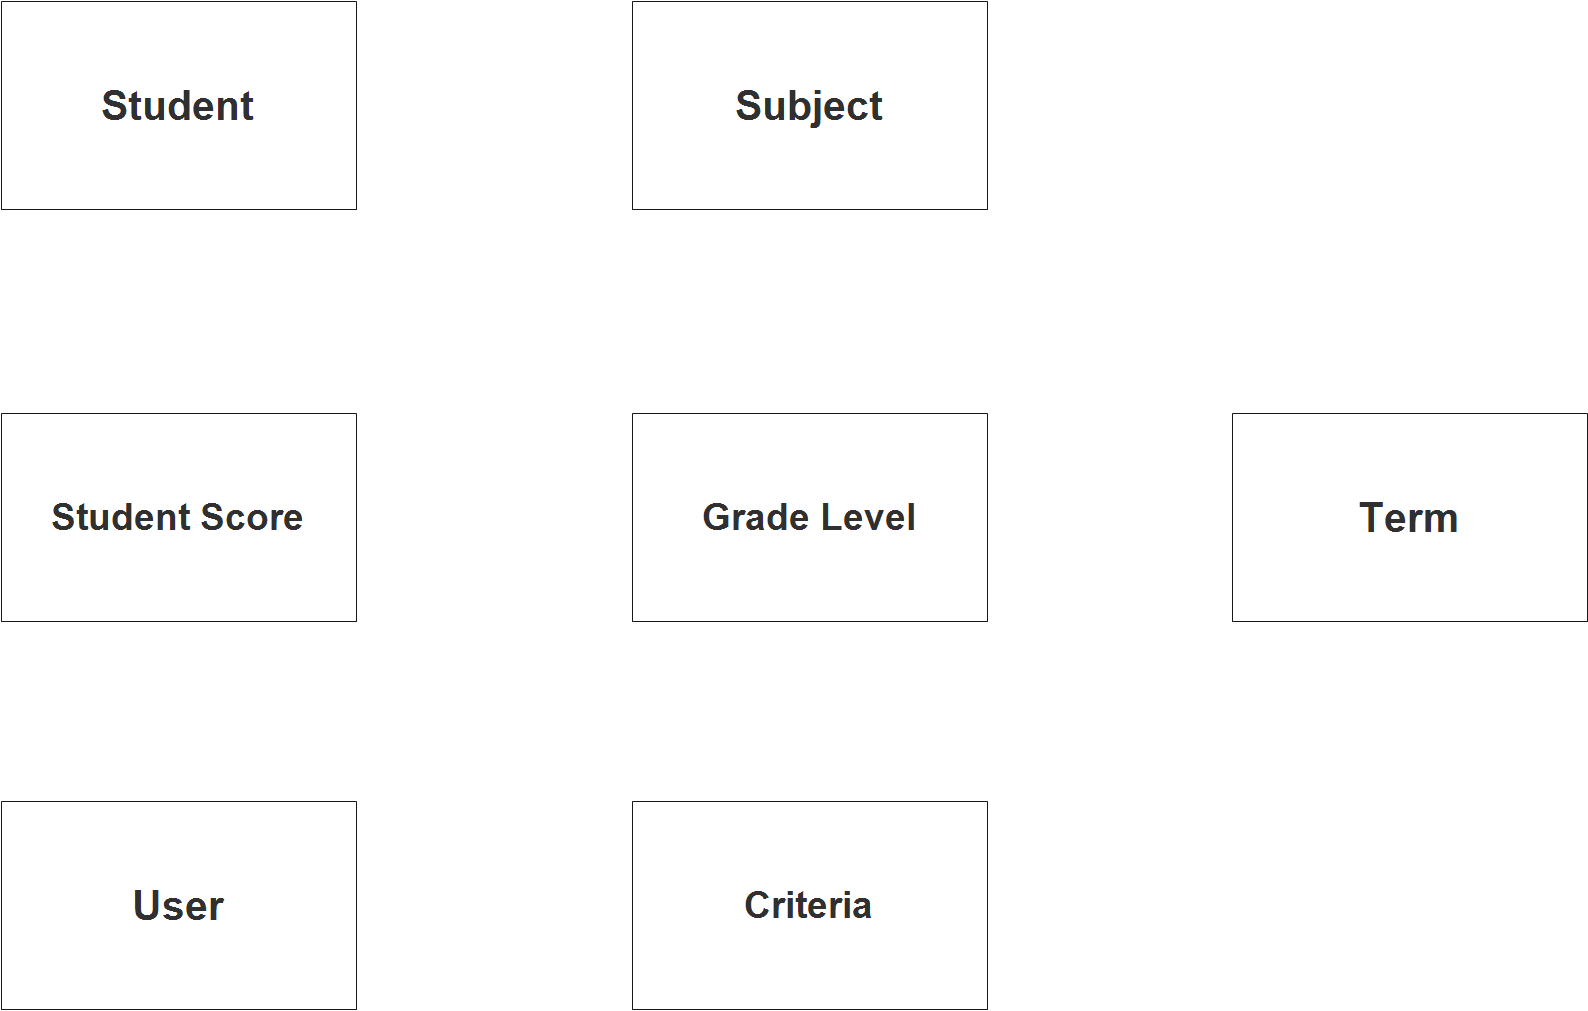 Student Tracking System ER Diagram - Step 1 Identify Entities